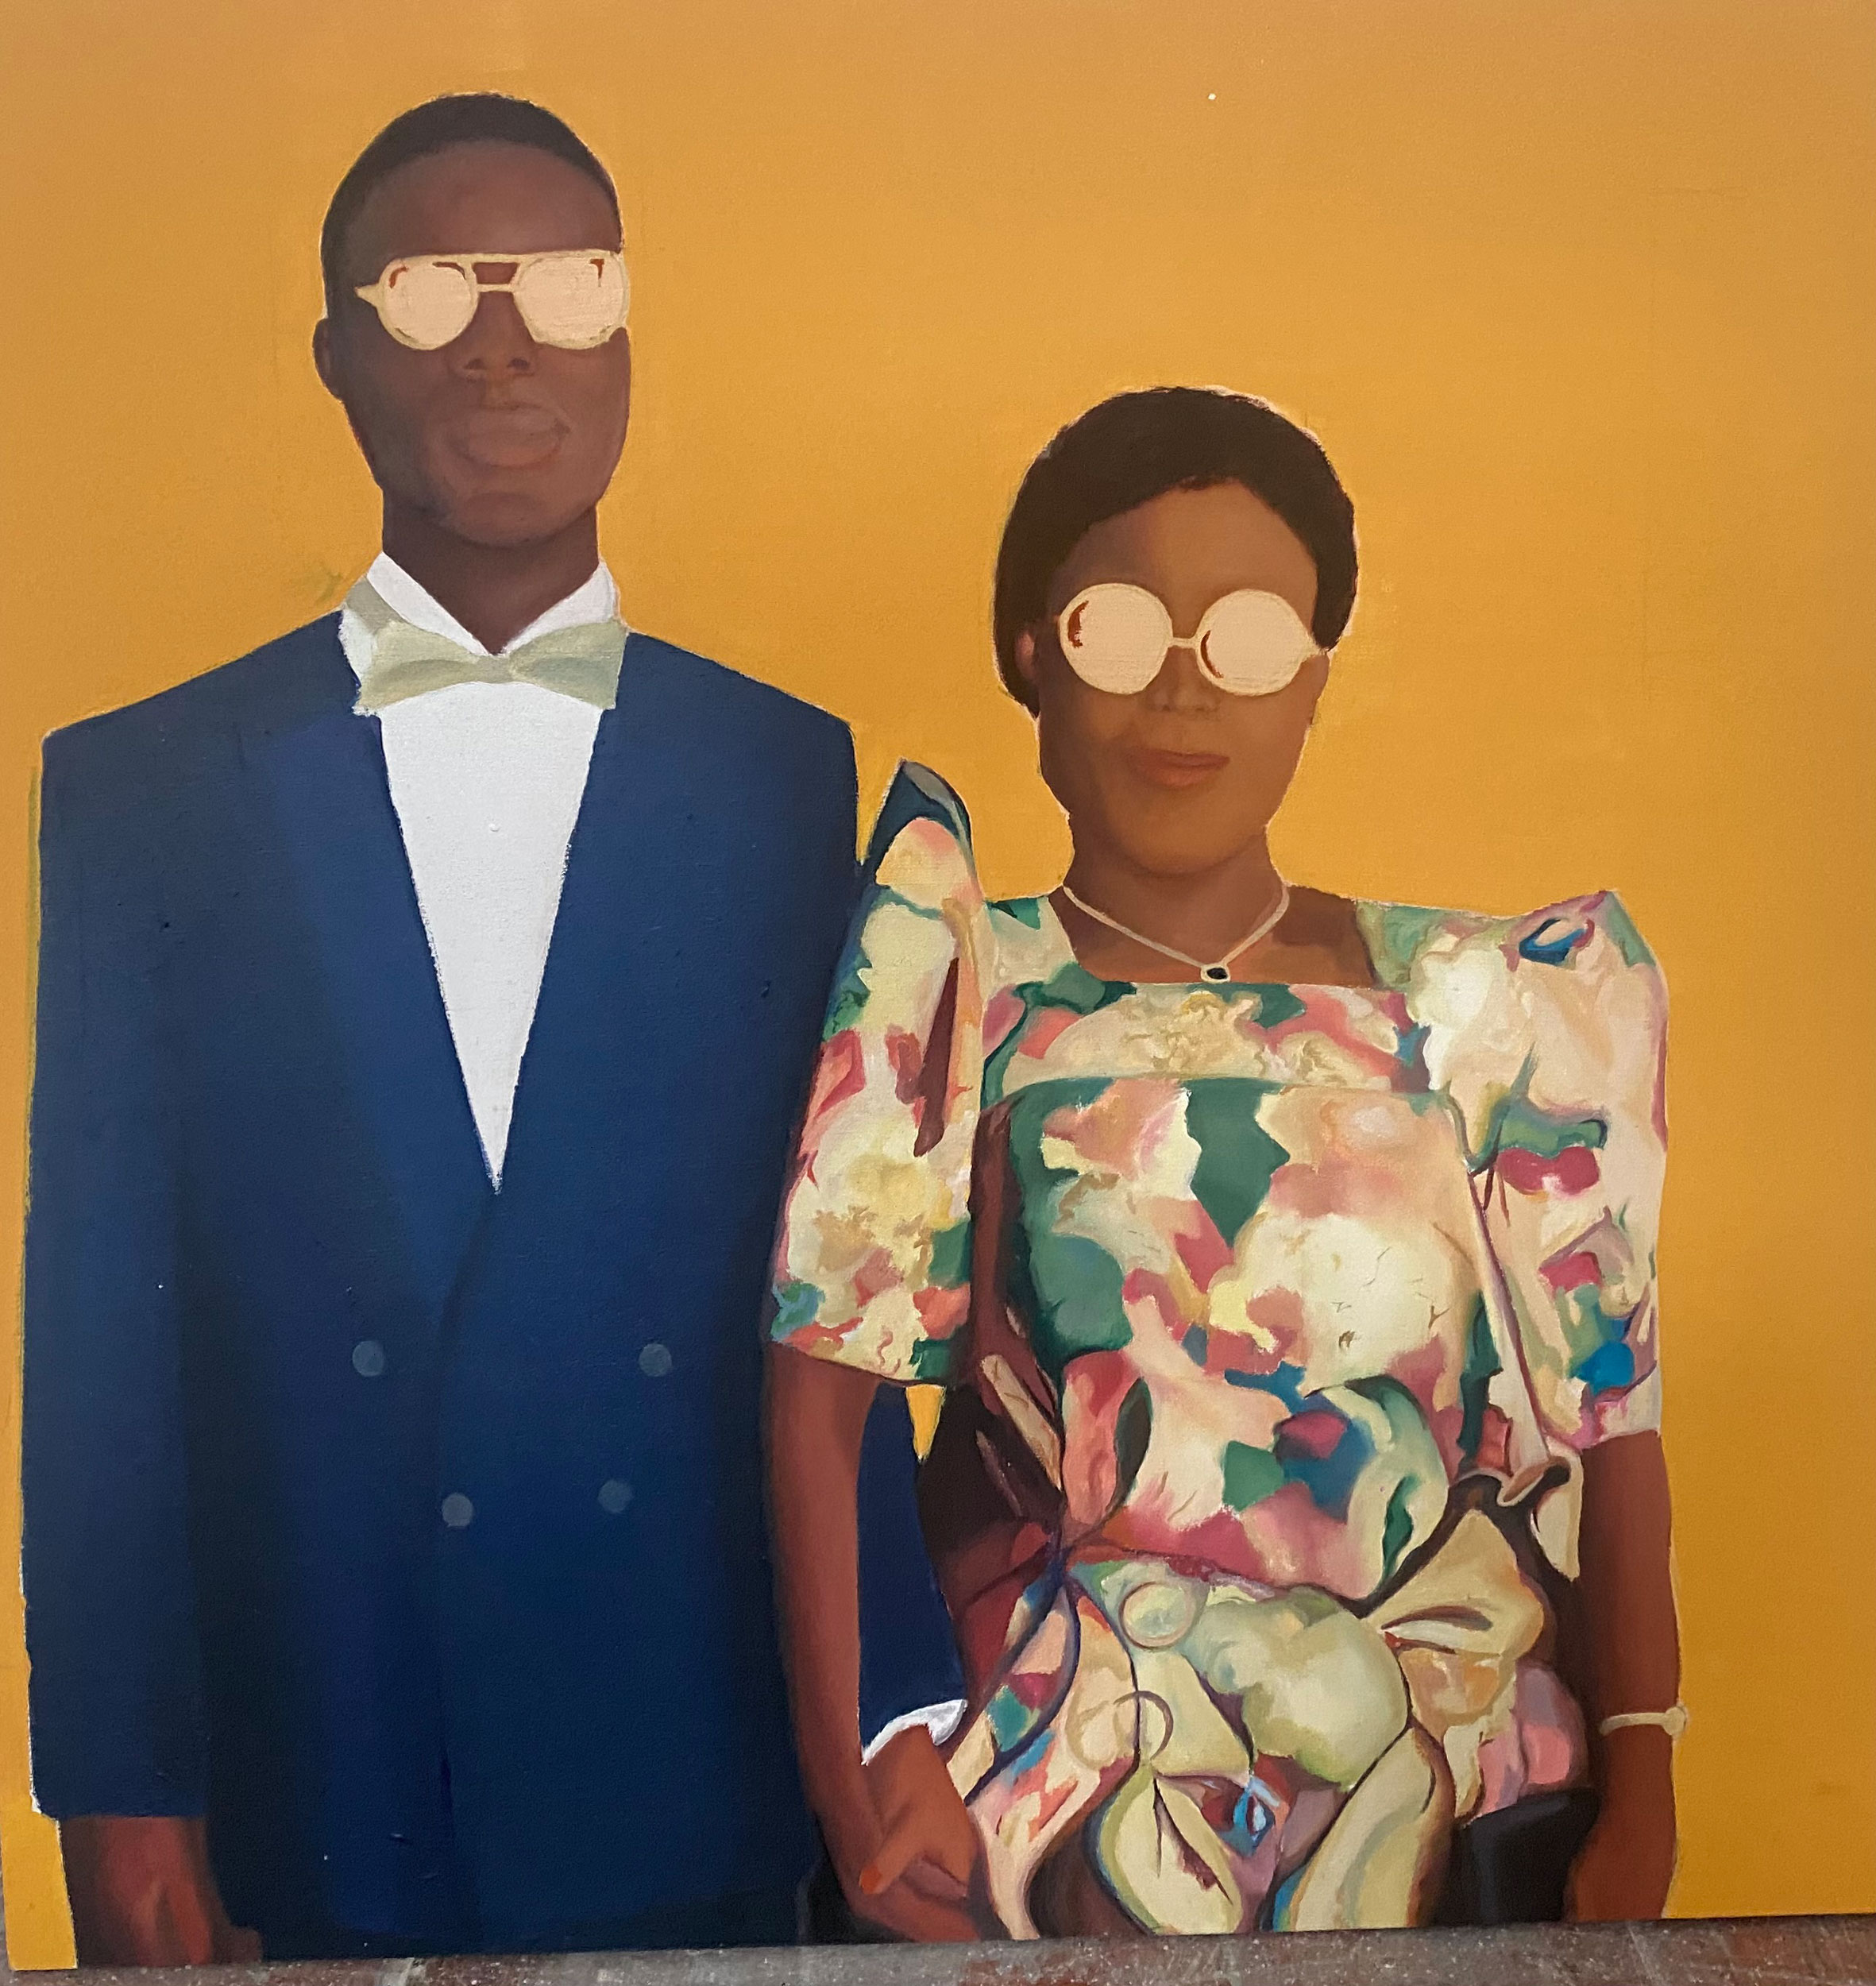 BA Fine Art work by Clara Mukasa. Two subjects dressed formally, one in a suit to the right, the other in a patterned garment on the left.